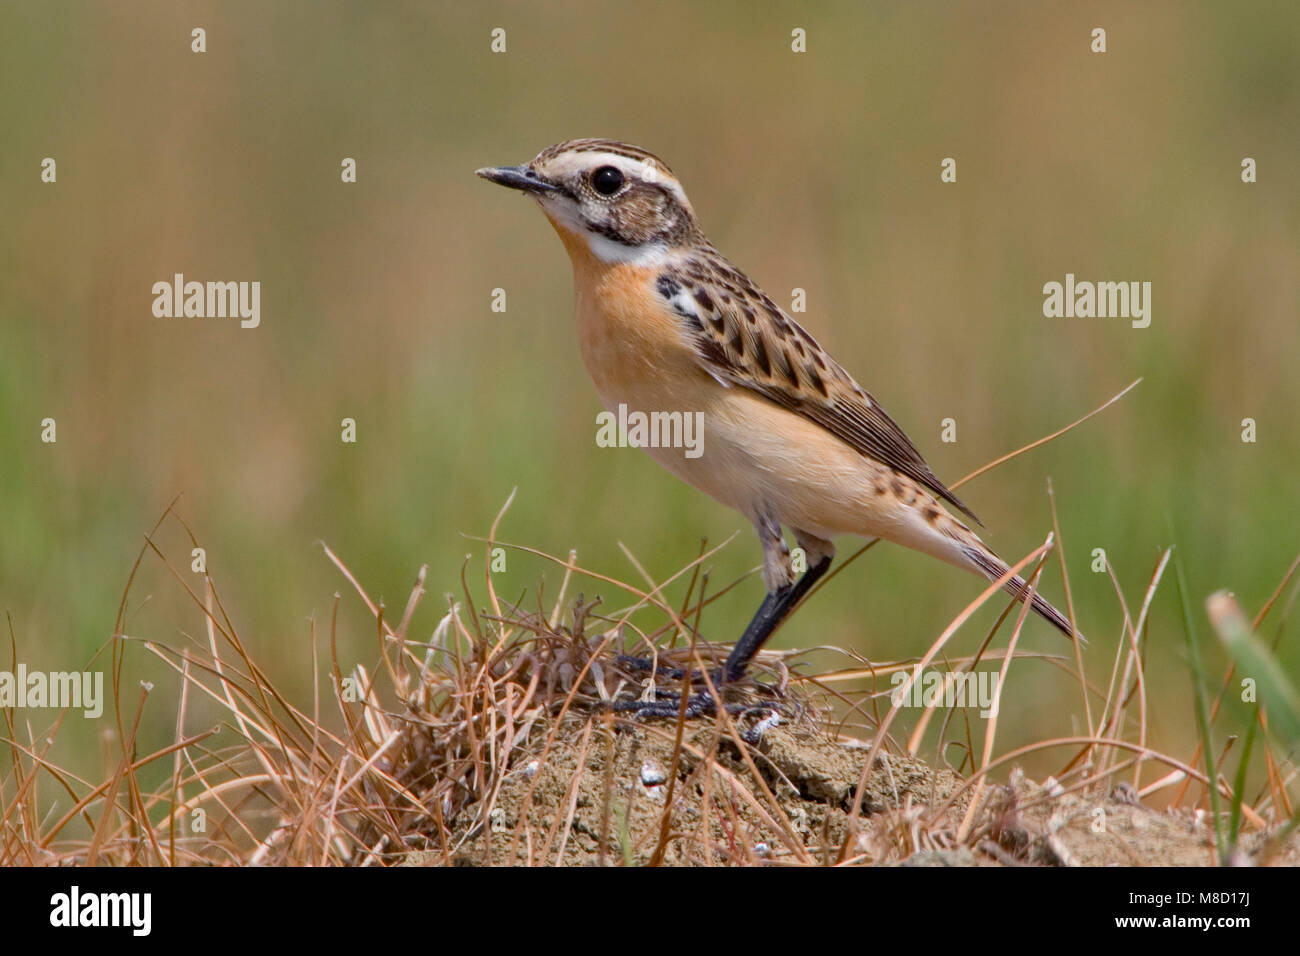 Whinchat perched; Paapje zittend Stock Photo